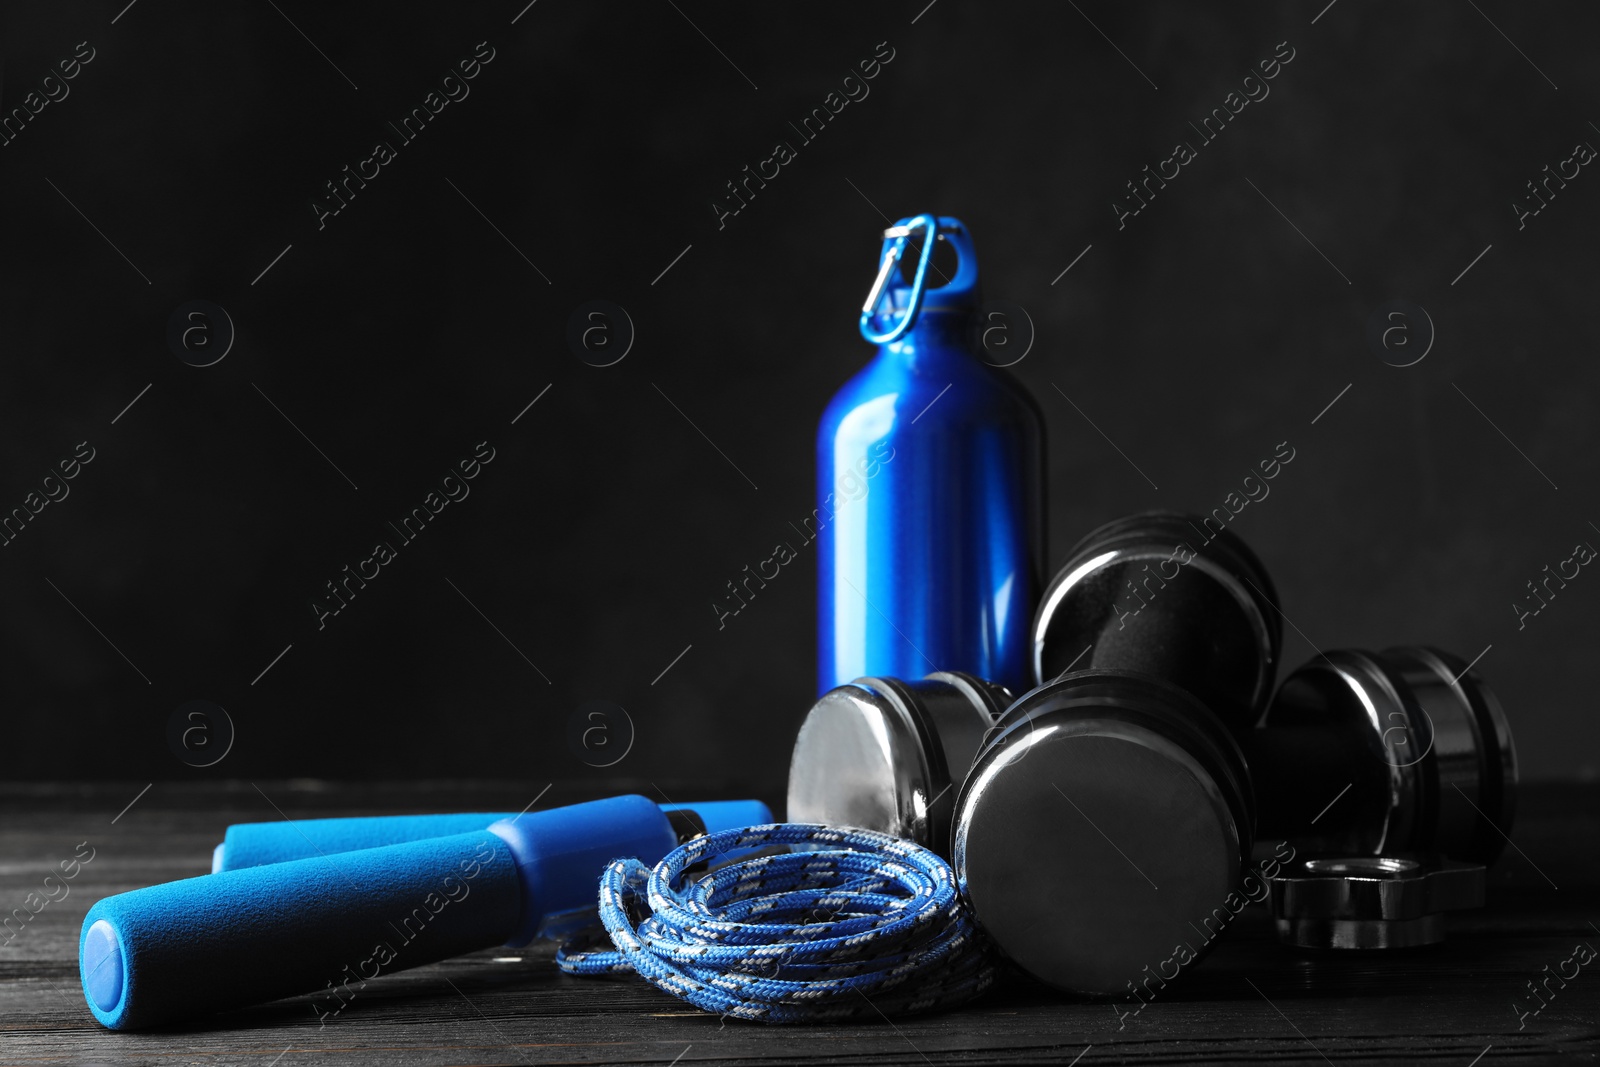 Photo of Gym equipment and accessories on wooden floor against dark background